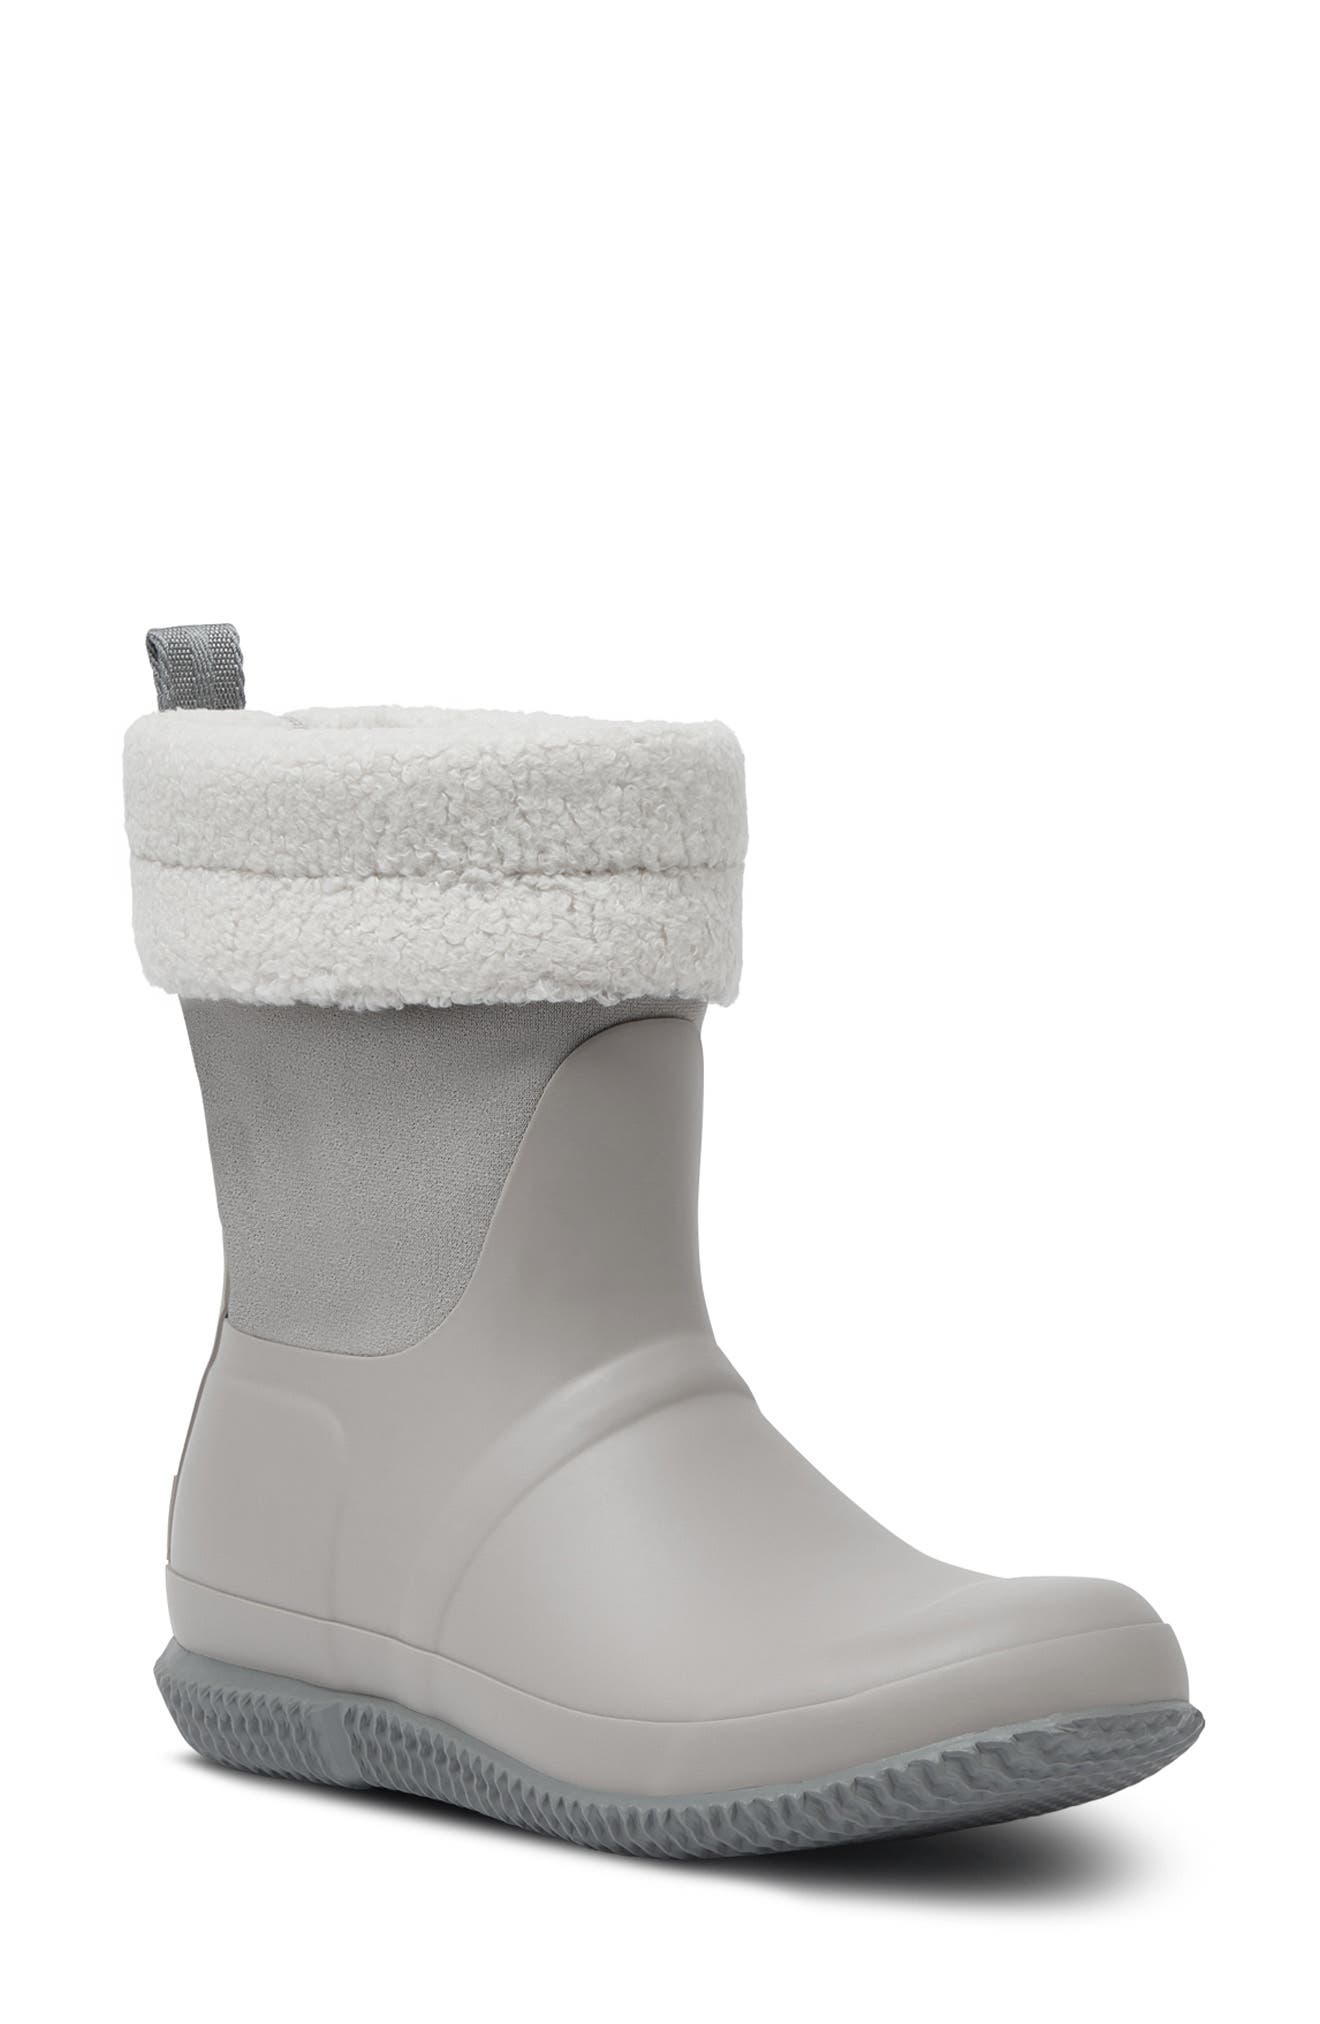 nordstrom snow boots